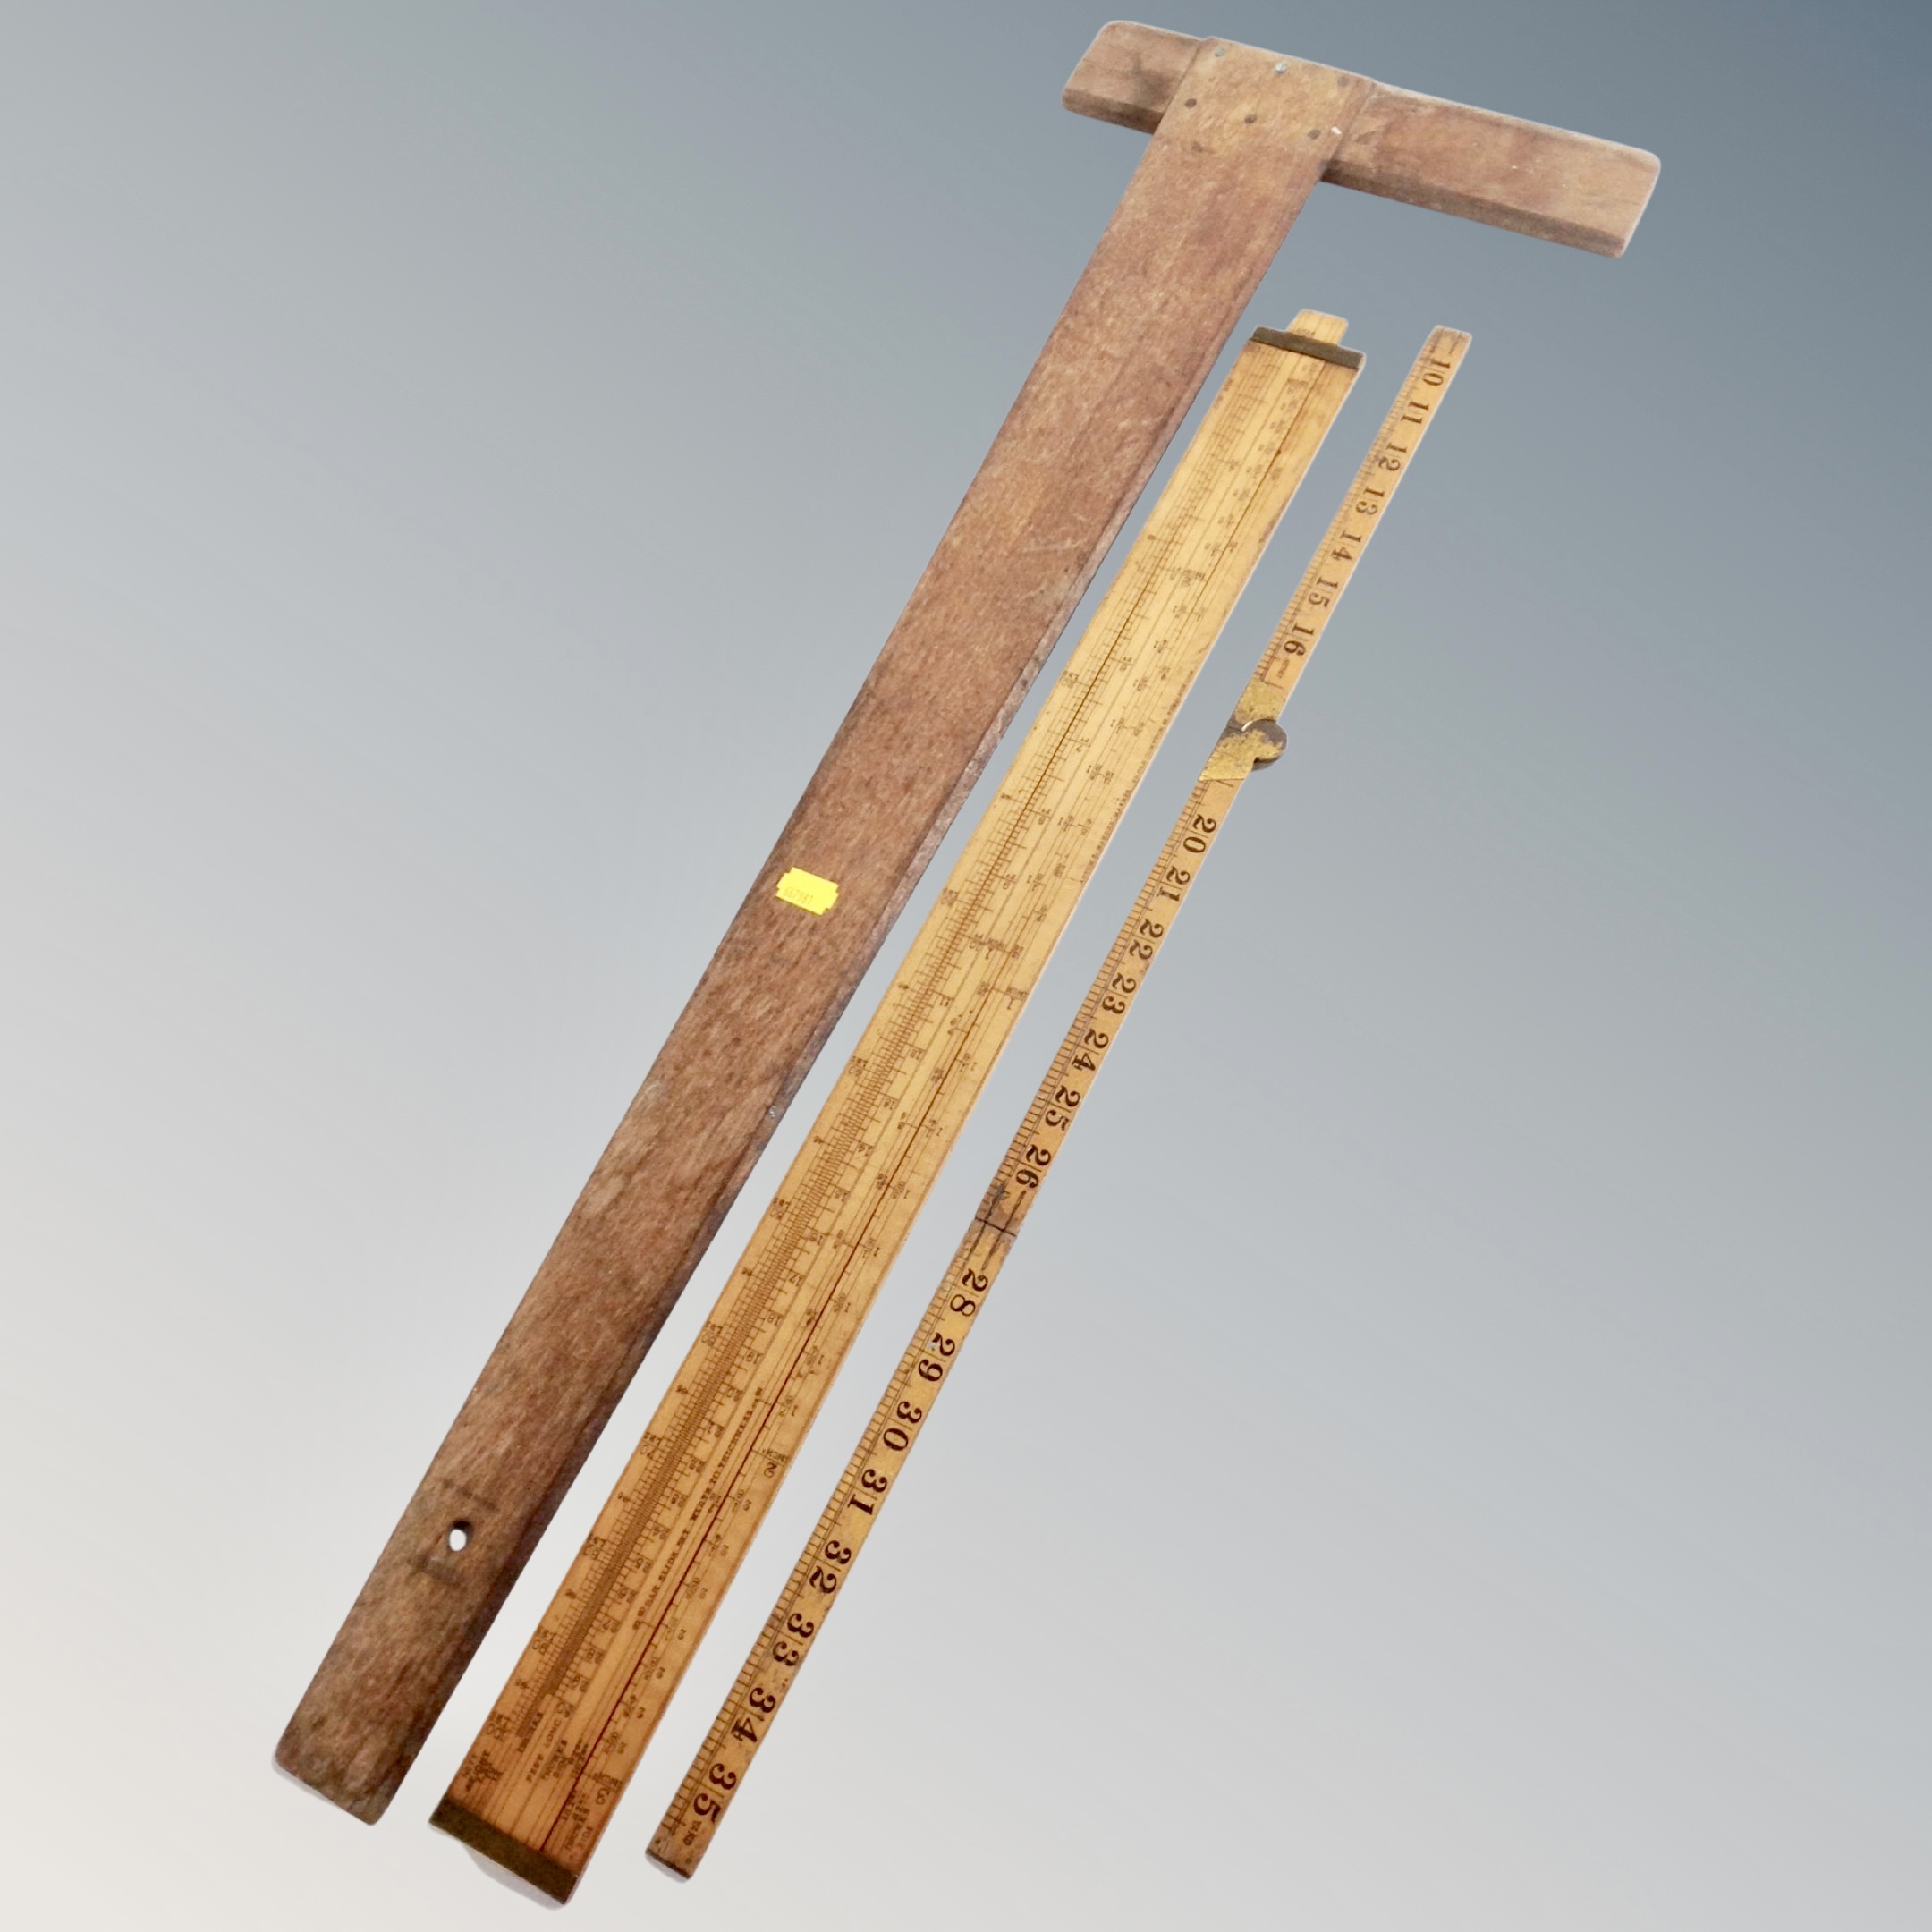 An antique boxwood ruler by Rabone, together with a further boxwood ruler by Asoton and Mander.